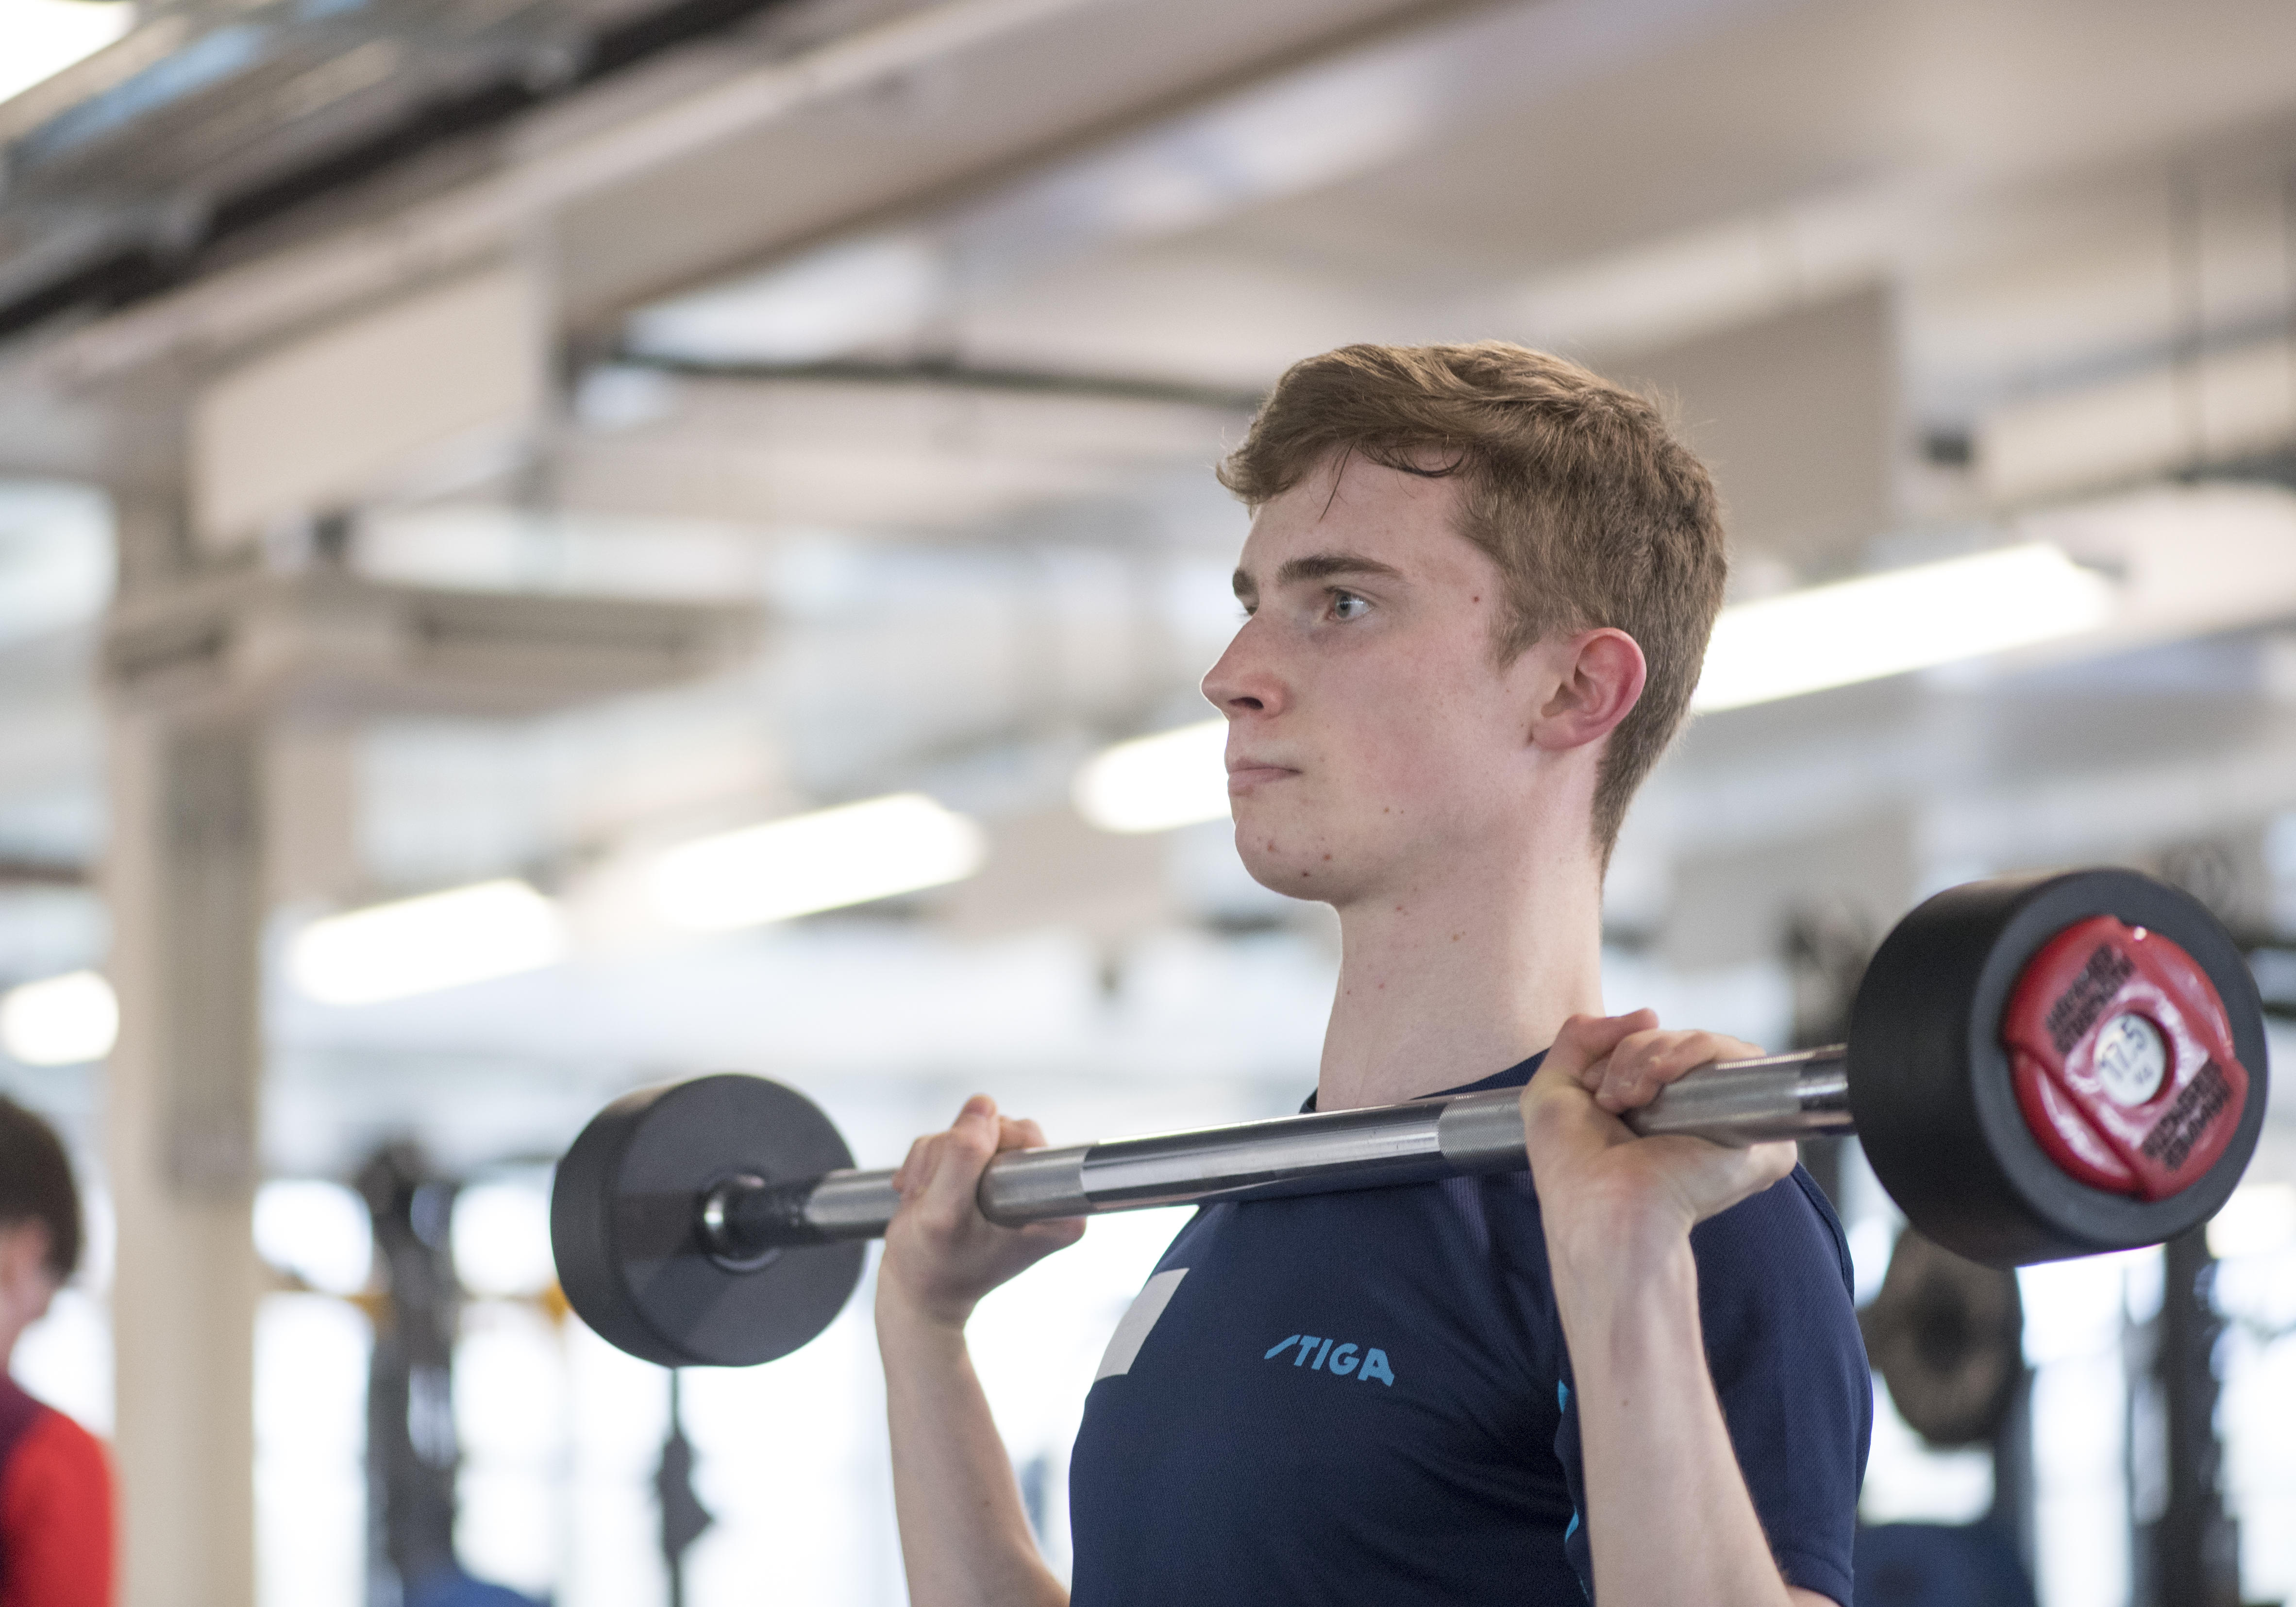 Young Persons sports and fitness membership